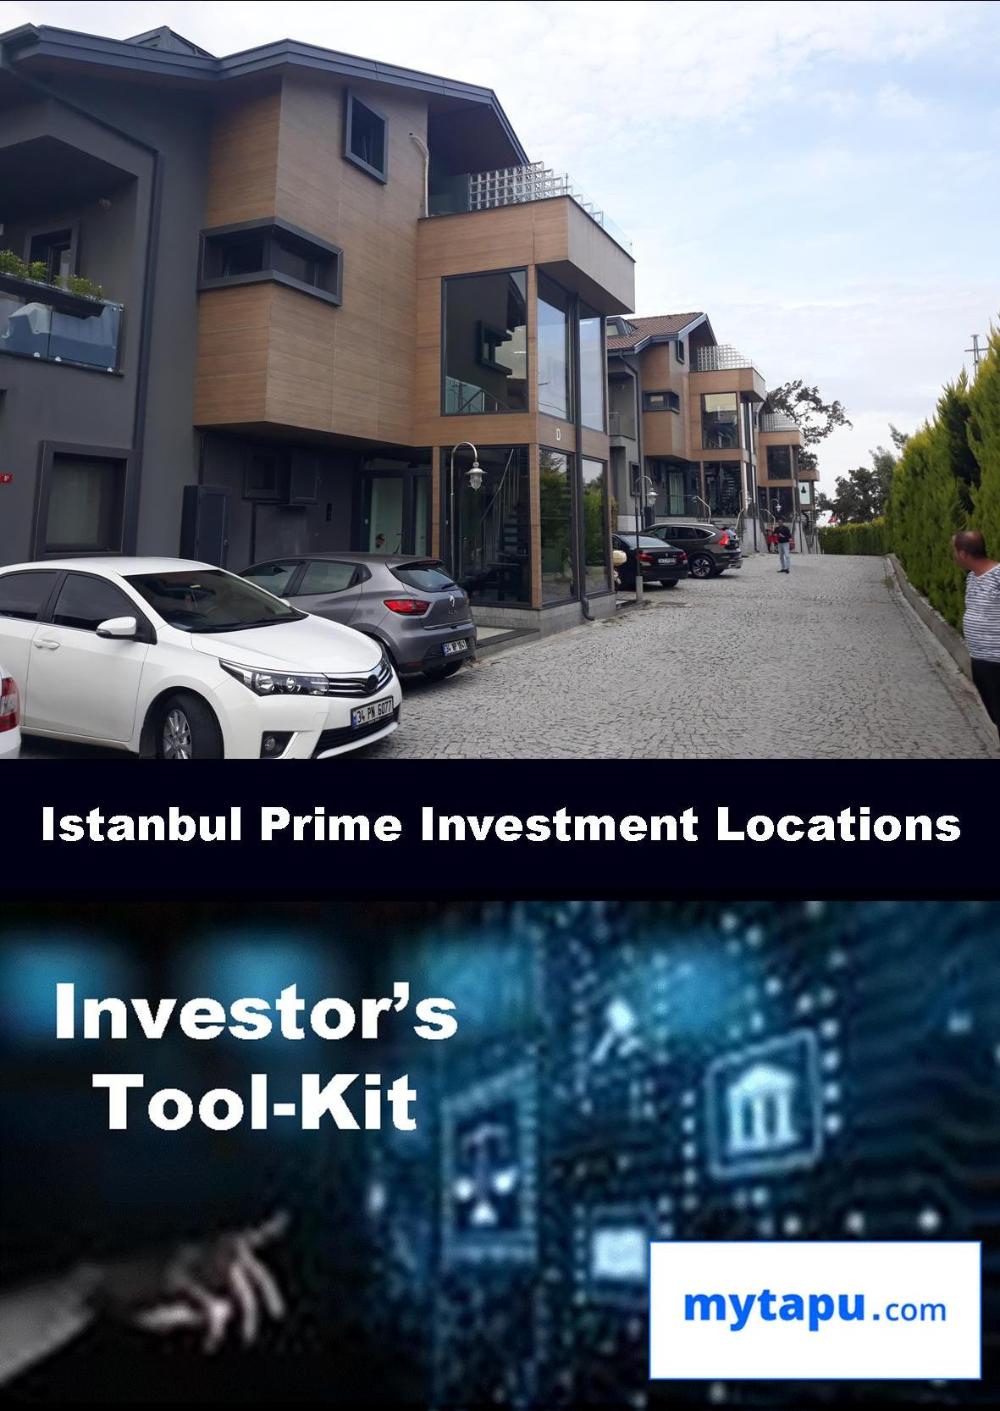  Exclusive Luxury Property for Investment in Prime istanbul Residential Locations